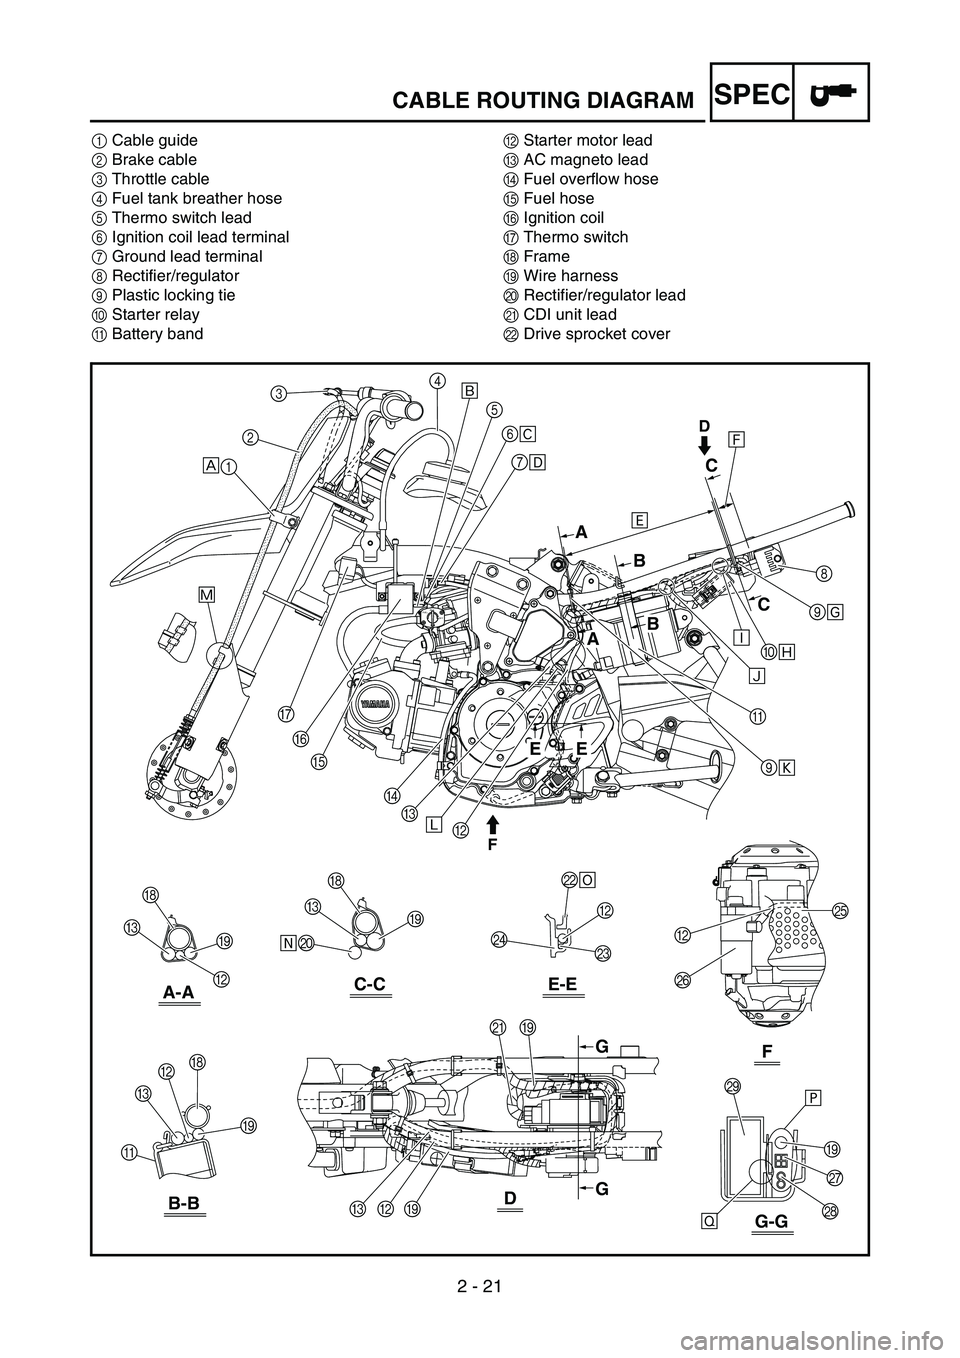 YAMAHA TTR50 2006  Betriebsanleitungen (in German) 
2 - 21
SPECCABLE ROUTING DIAGRAM
1Cable guide
2 Brake cable
3 Throttle cable
4 Fuel tank breather hose
5 Thermo switch lead
6 Ignition coil lead terminal
7 Ground lead terminal
8 Rectifier/regulator
